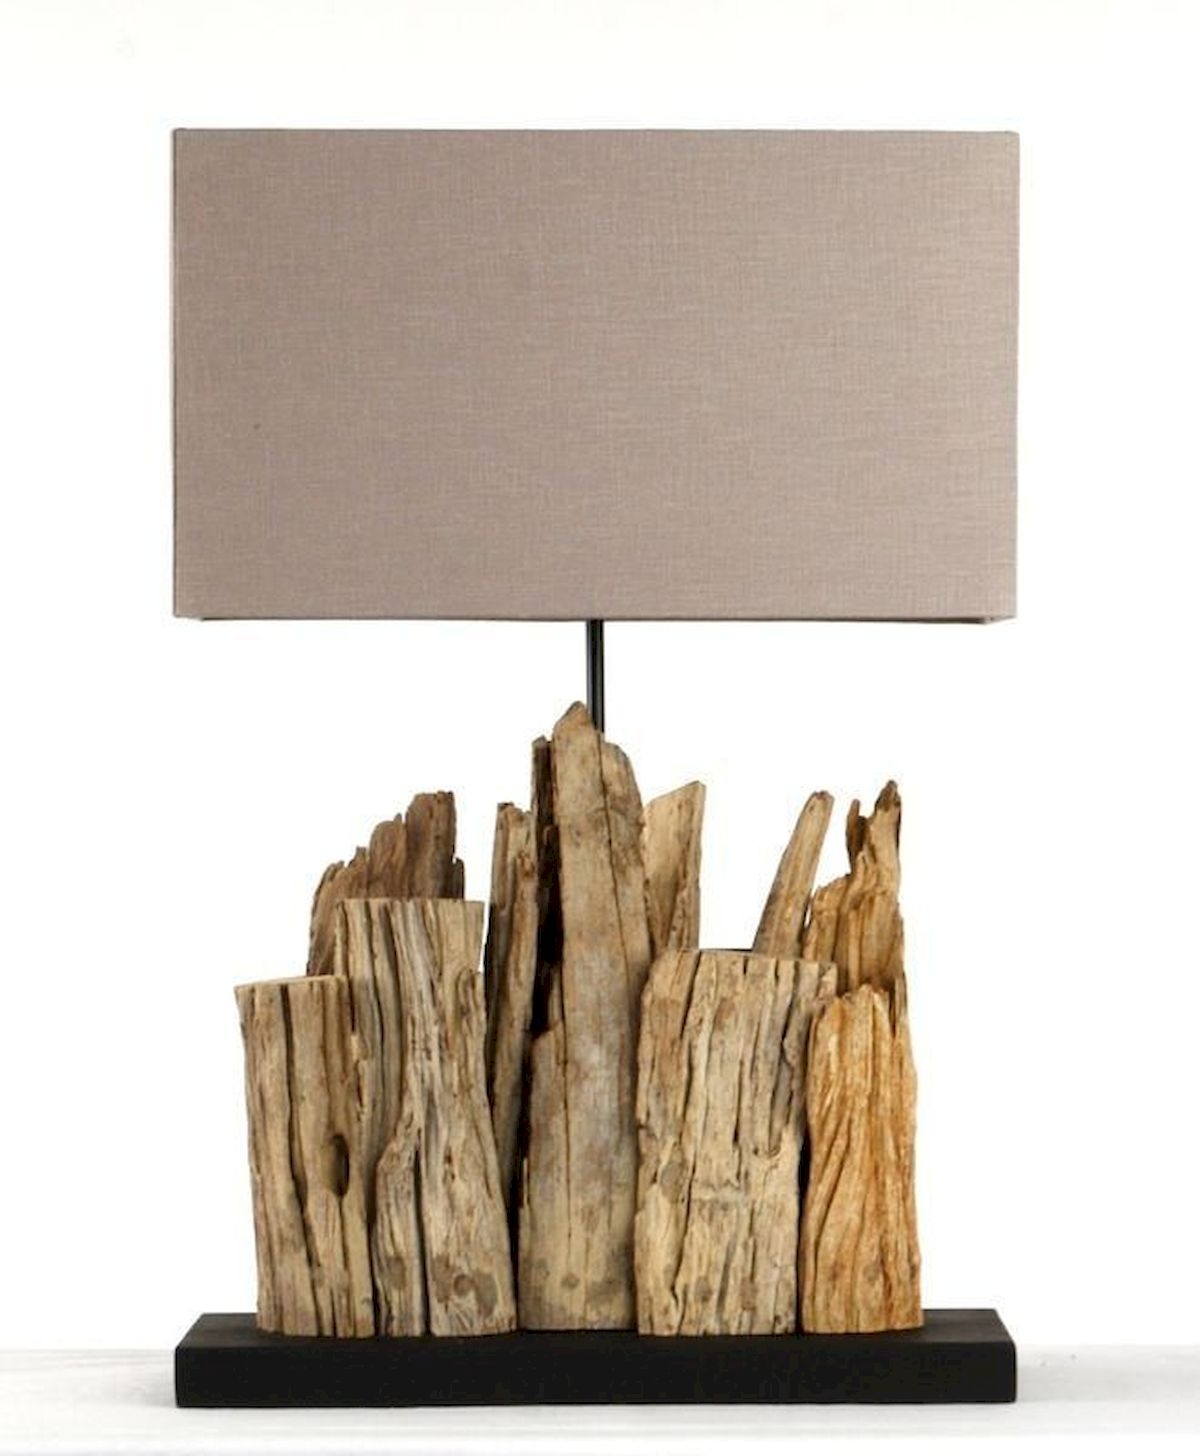 Vertico Riverine 18" H Table Lamp with Rectangular Shade